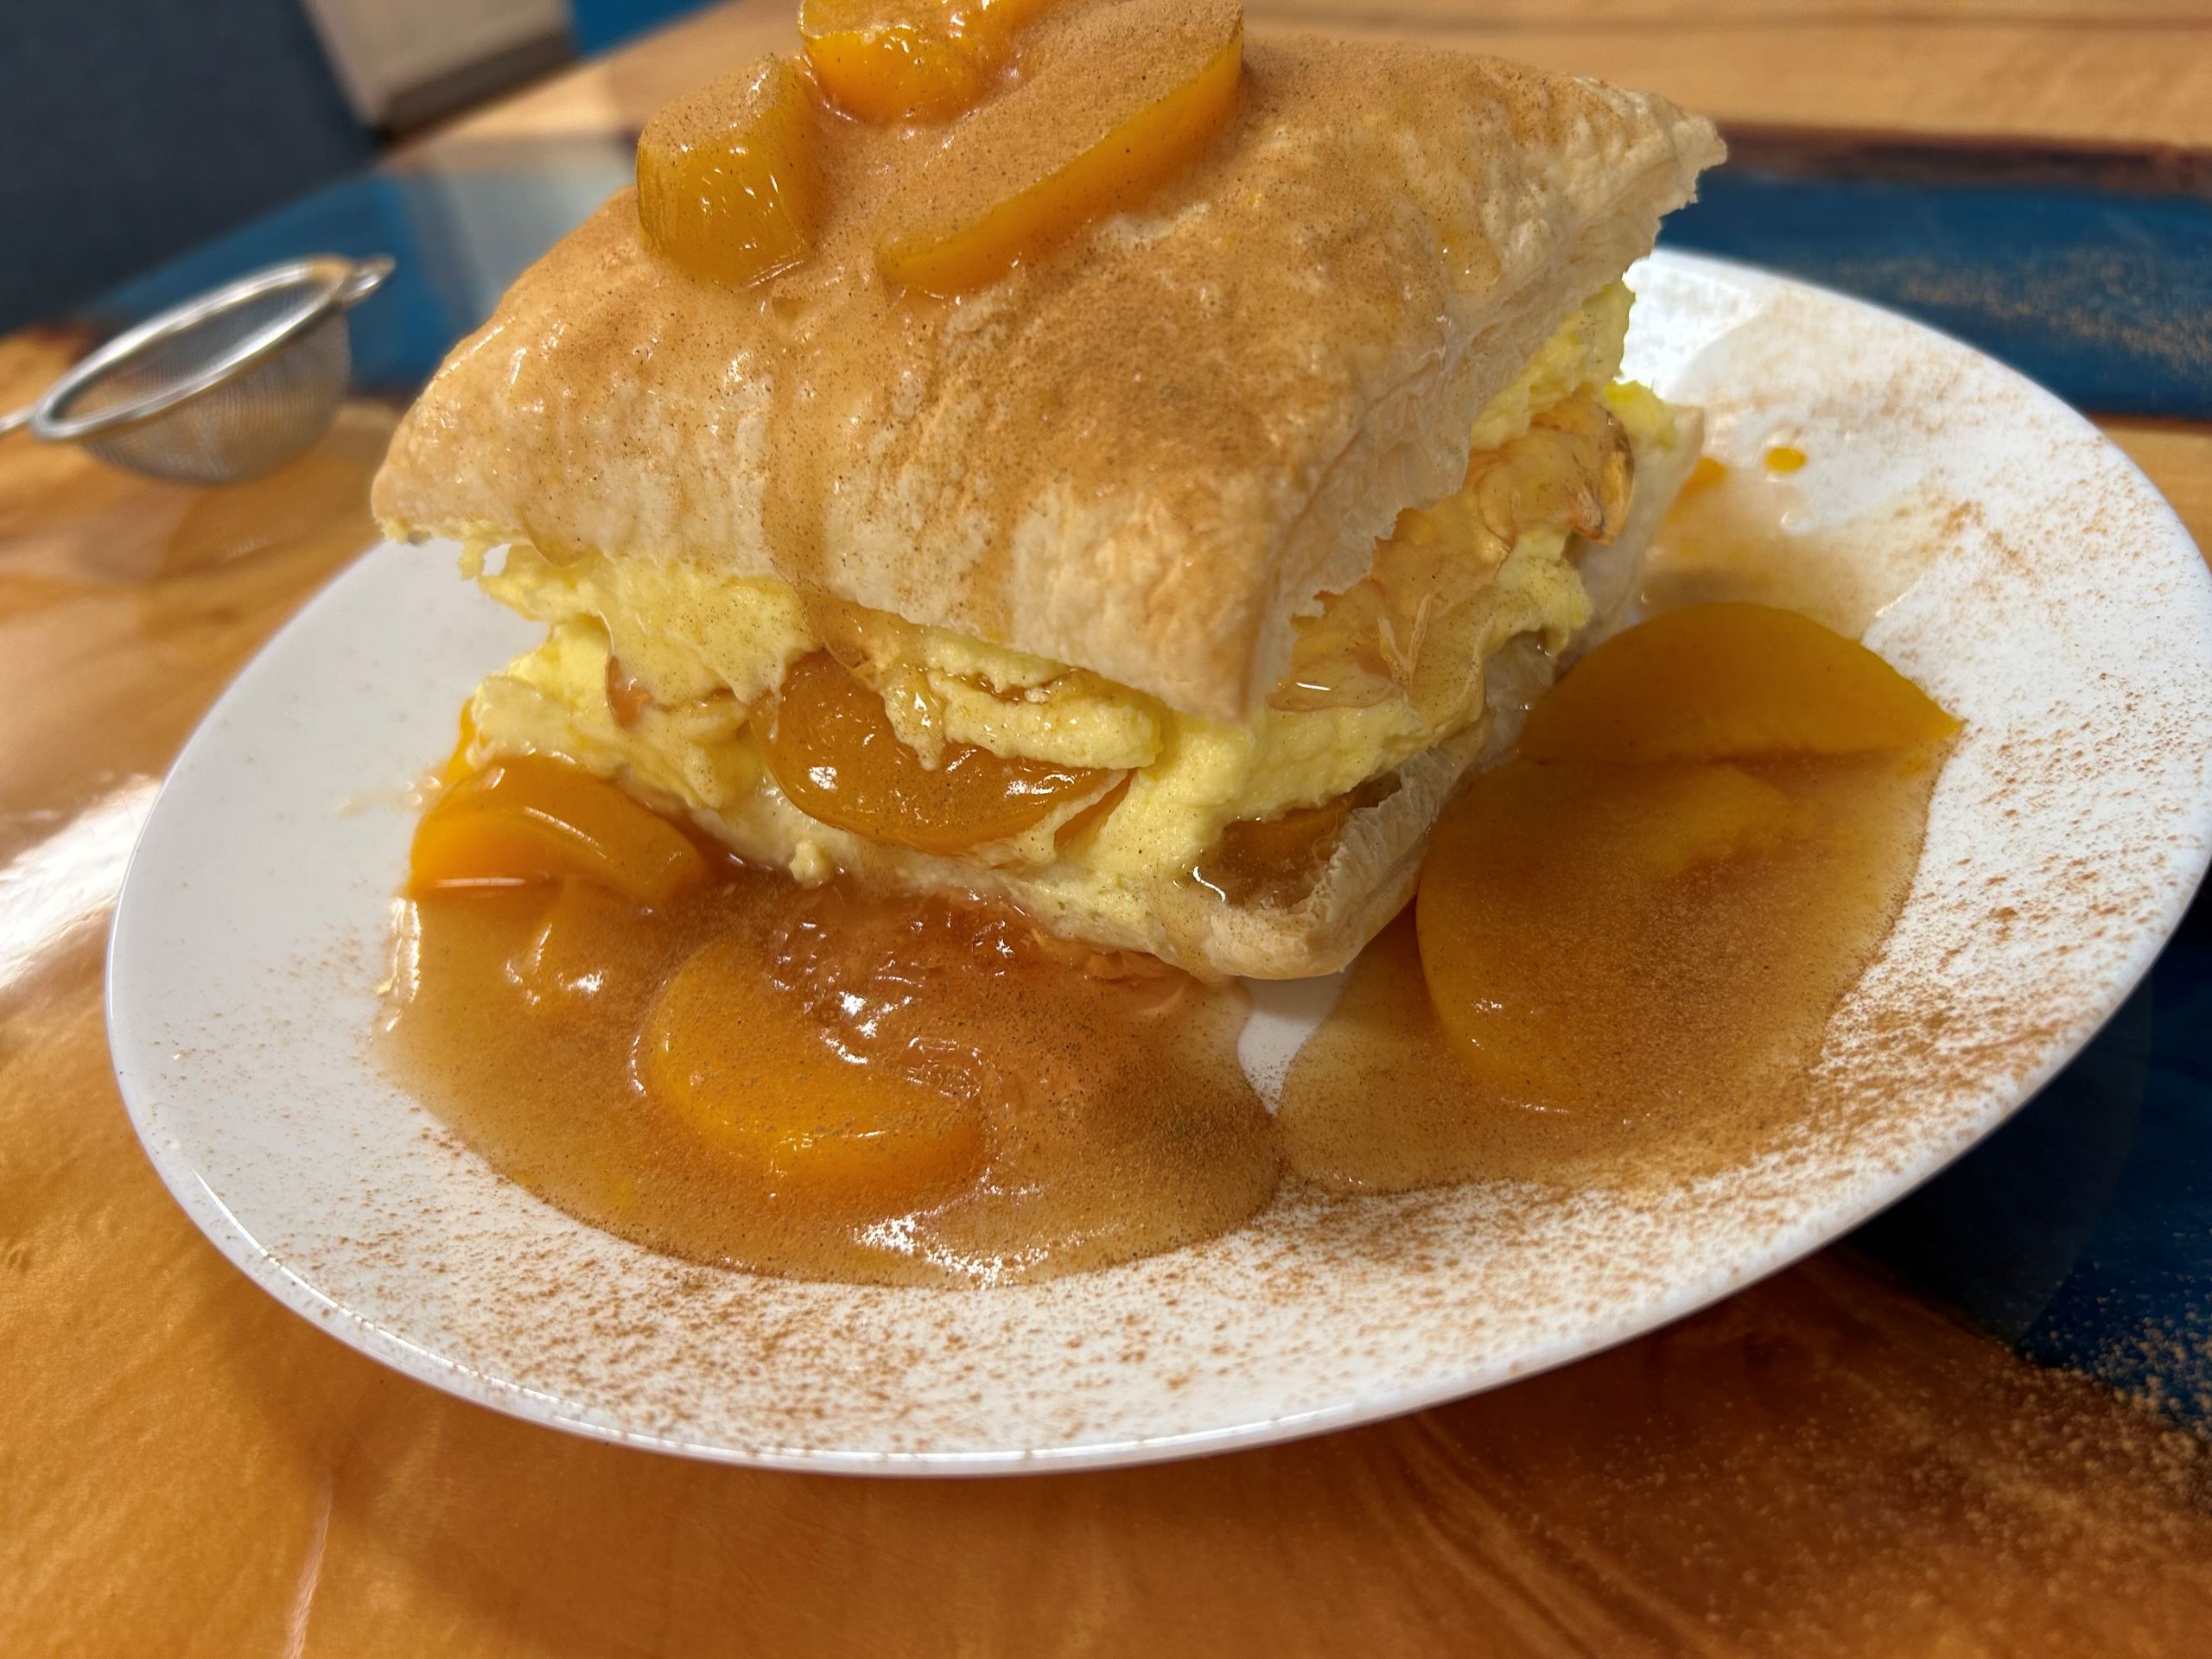 Kat's Slavic Napoleon dessert made from flakey french pastry croissant-like dough filled with light cream, peaches, and peach jello, topped with more peaches and sprinkled with cinnamon served on a white plate with peach syrup, peaches and garnished with cinnamon, on the custom ambrosia maple wood table at Kat's Cafe in Minersville.